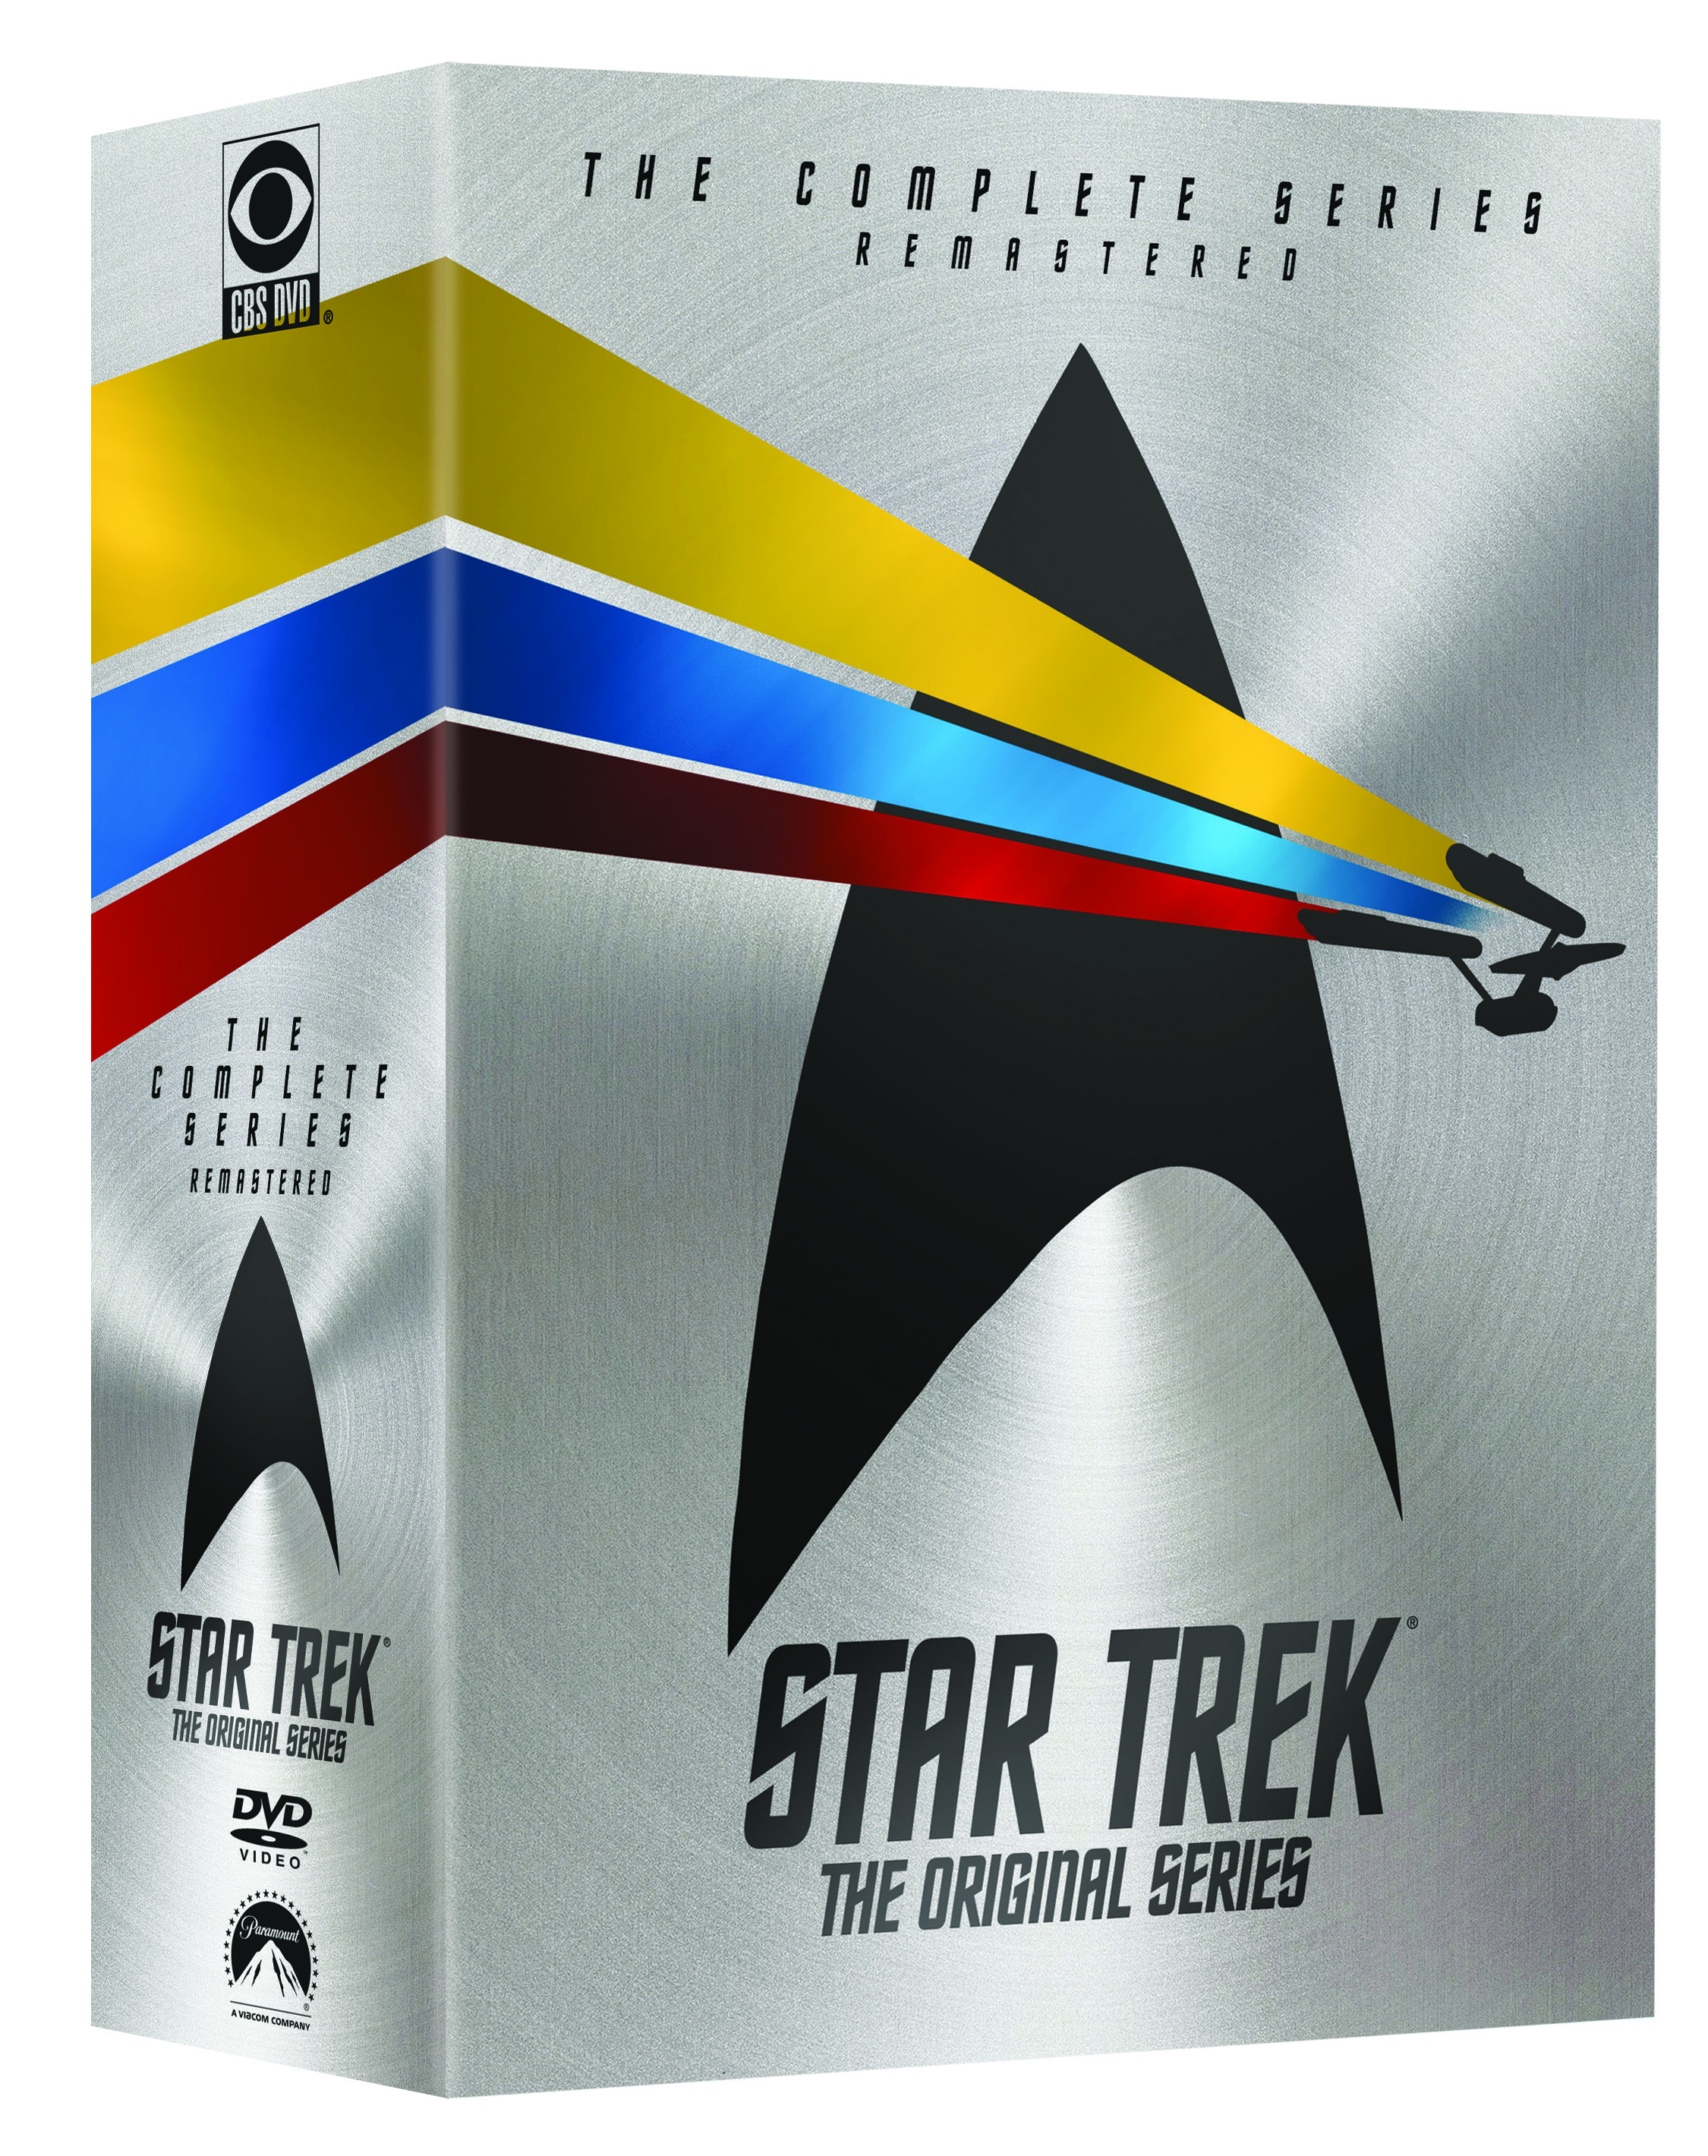 Star Trek: TOS – The Complete Series Megapack DVD Set Now Available for  Pre-order – TrekMovie.com